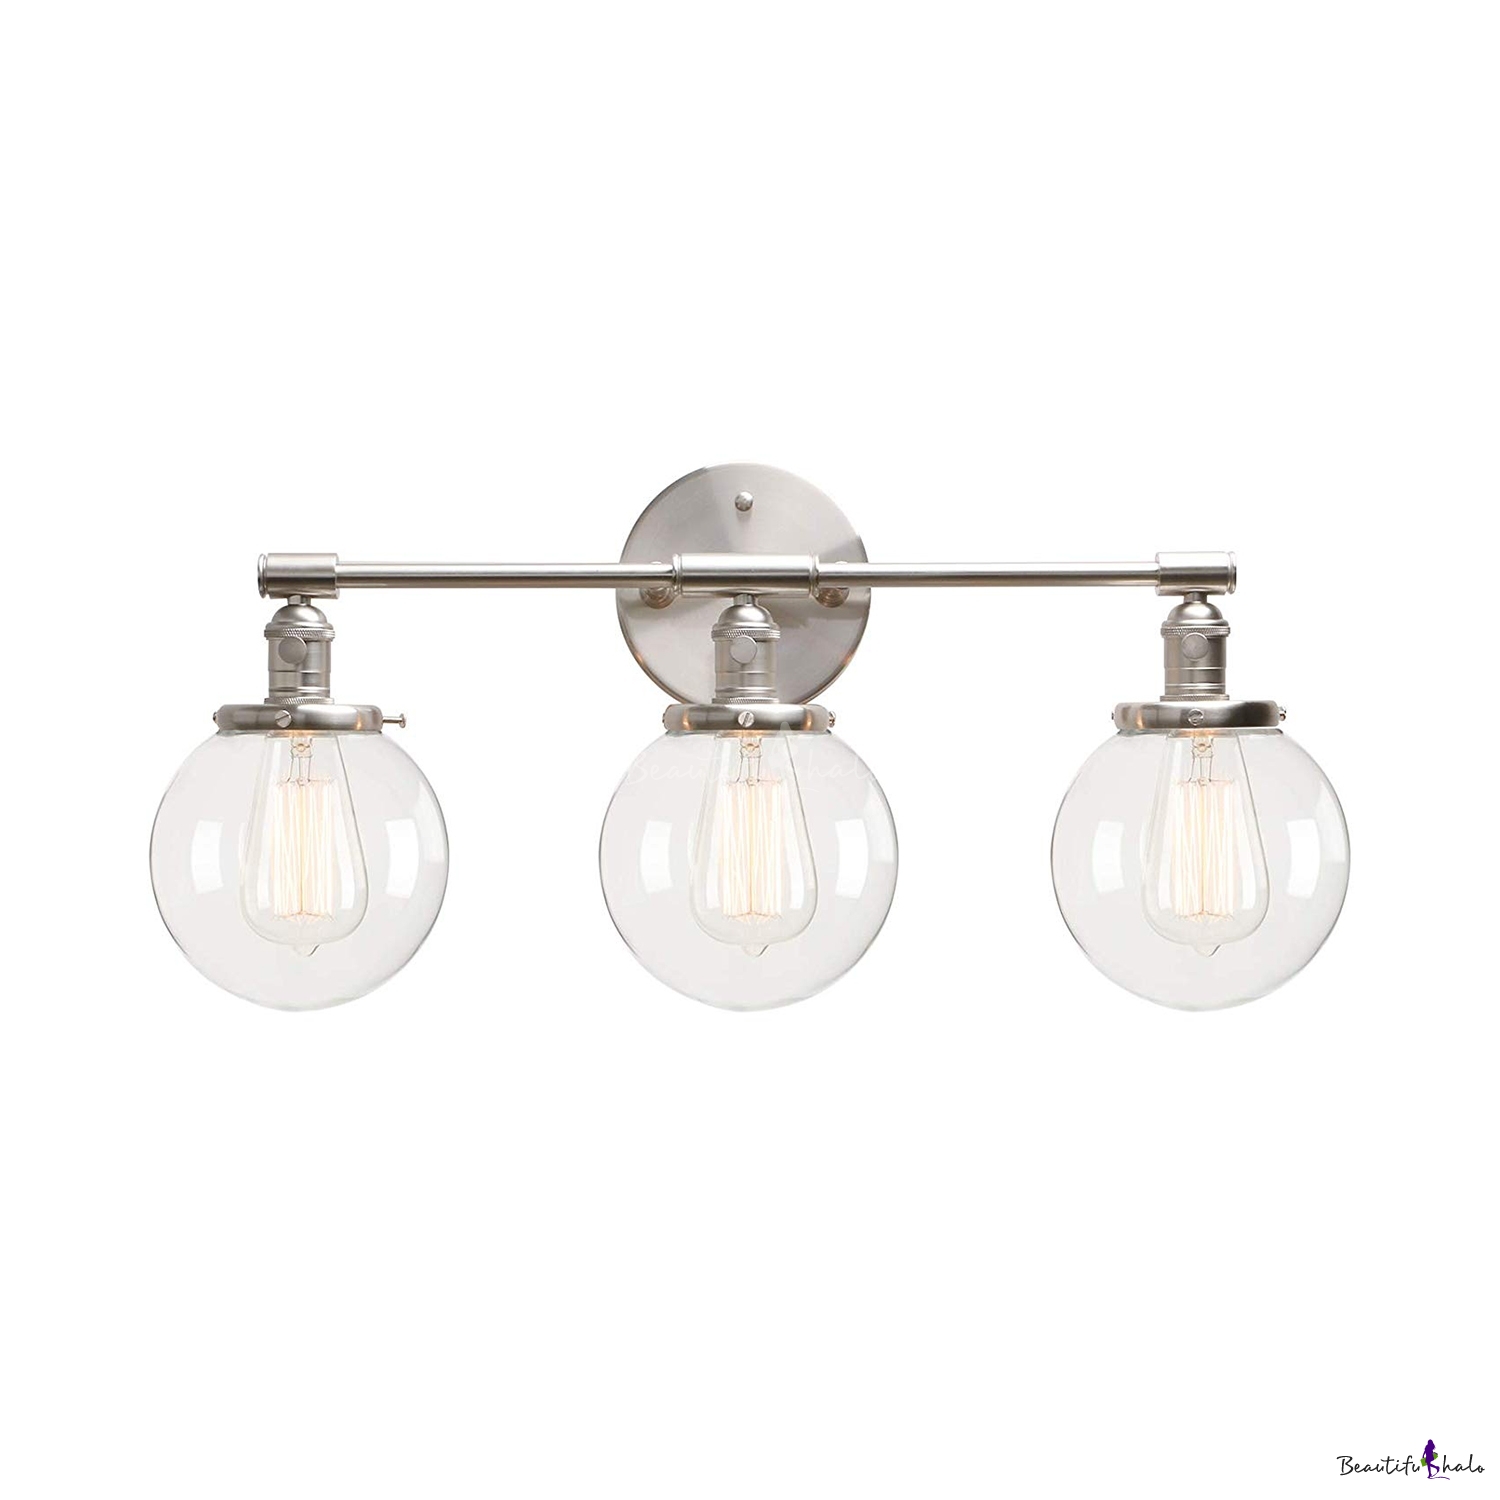 3 Lights Globe Wall Light Vintage Style Metal and Glass Wall Sconce in ...